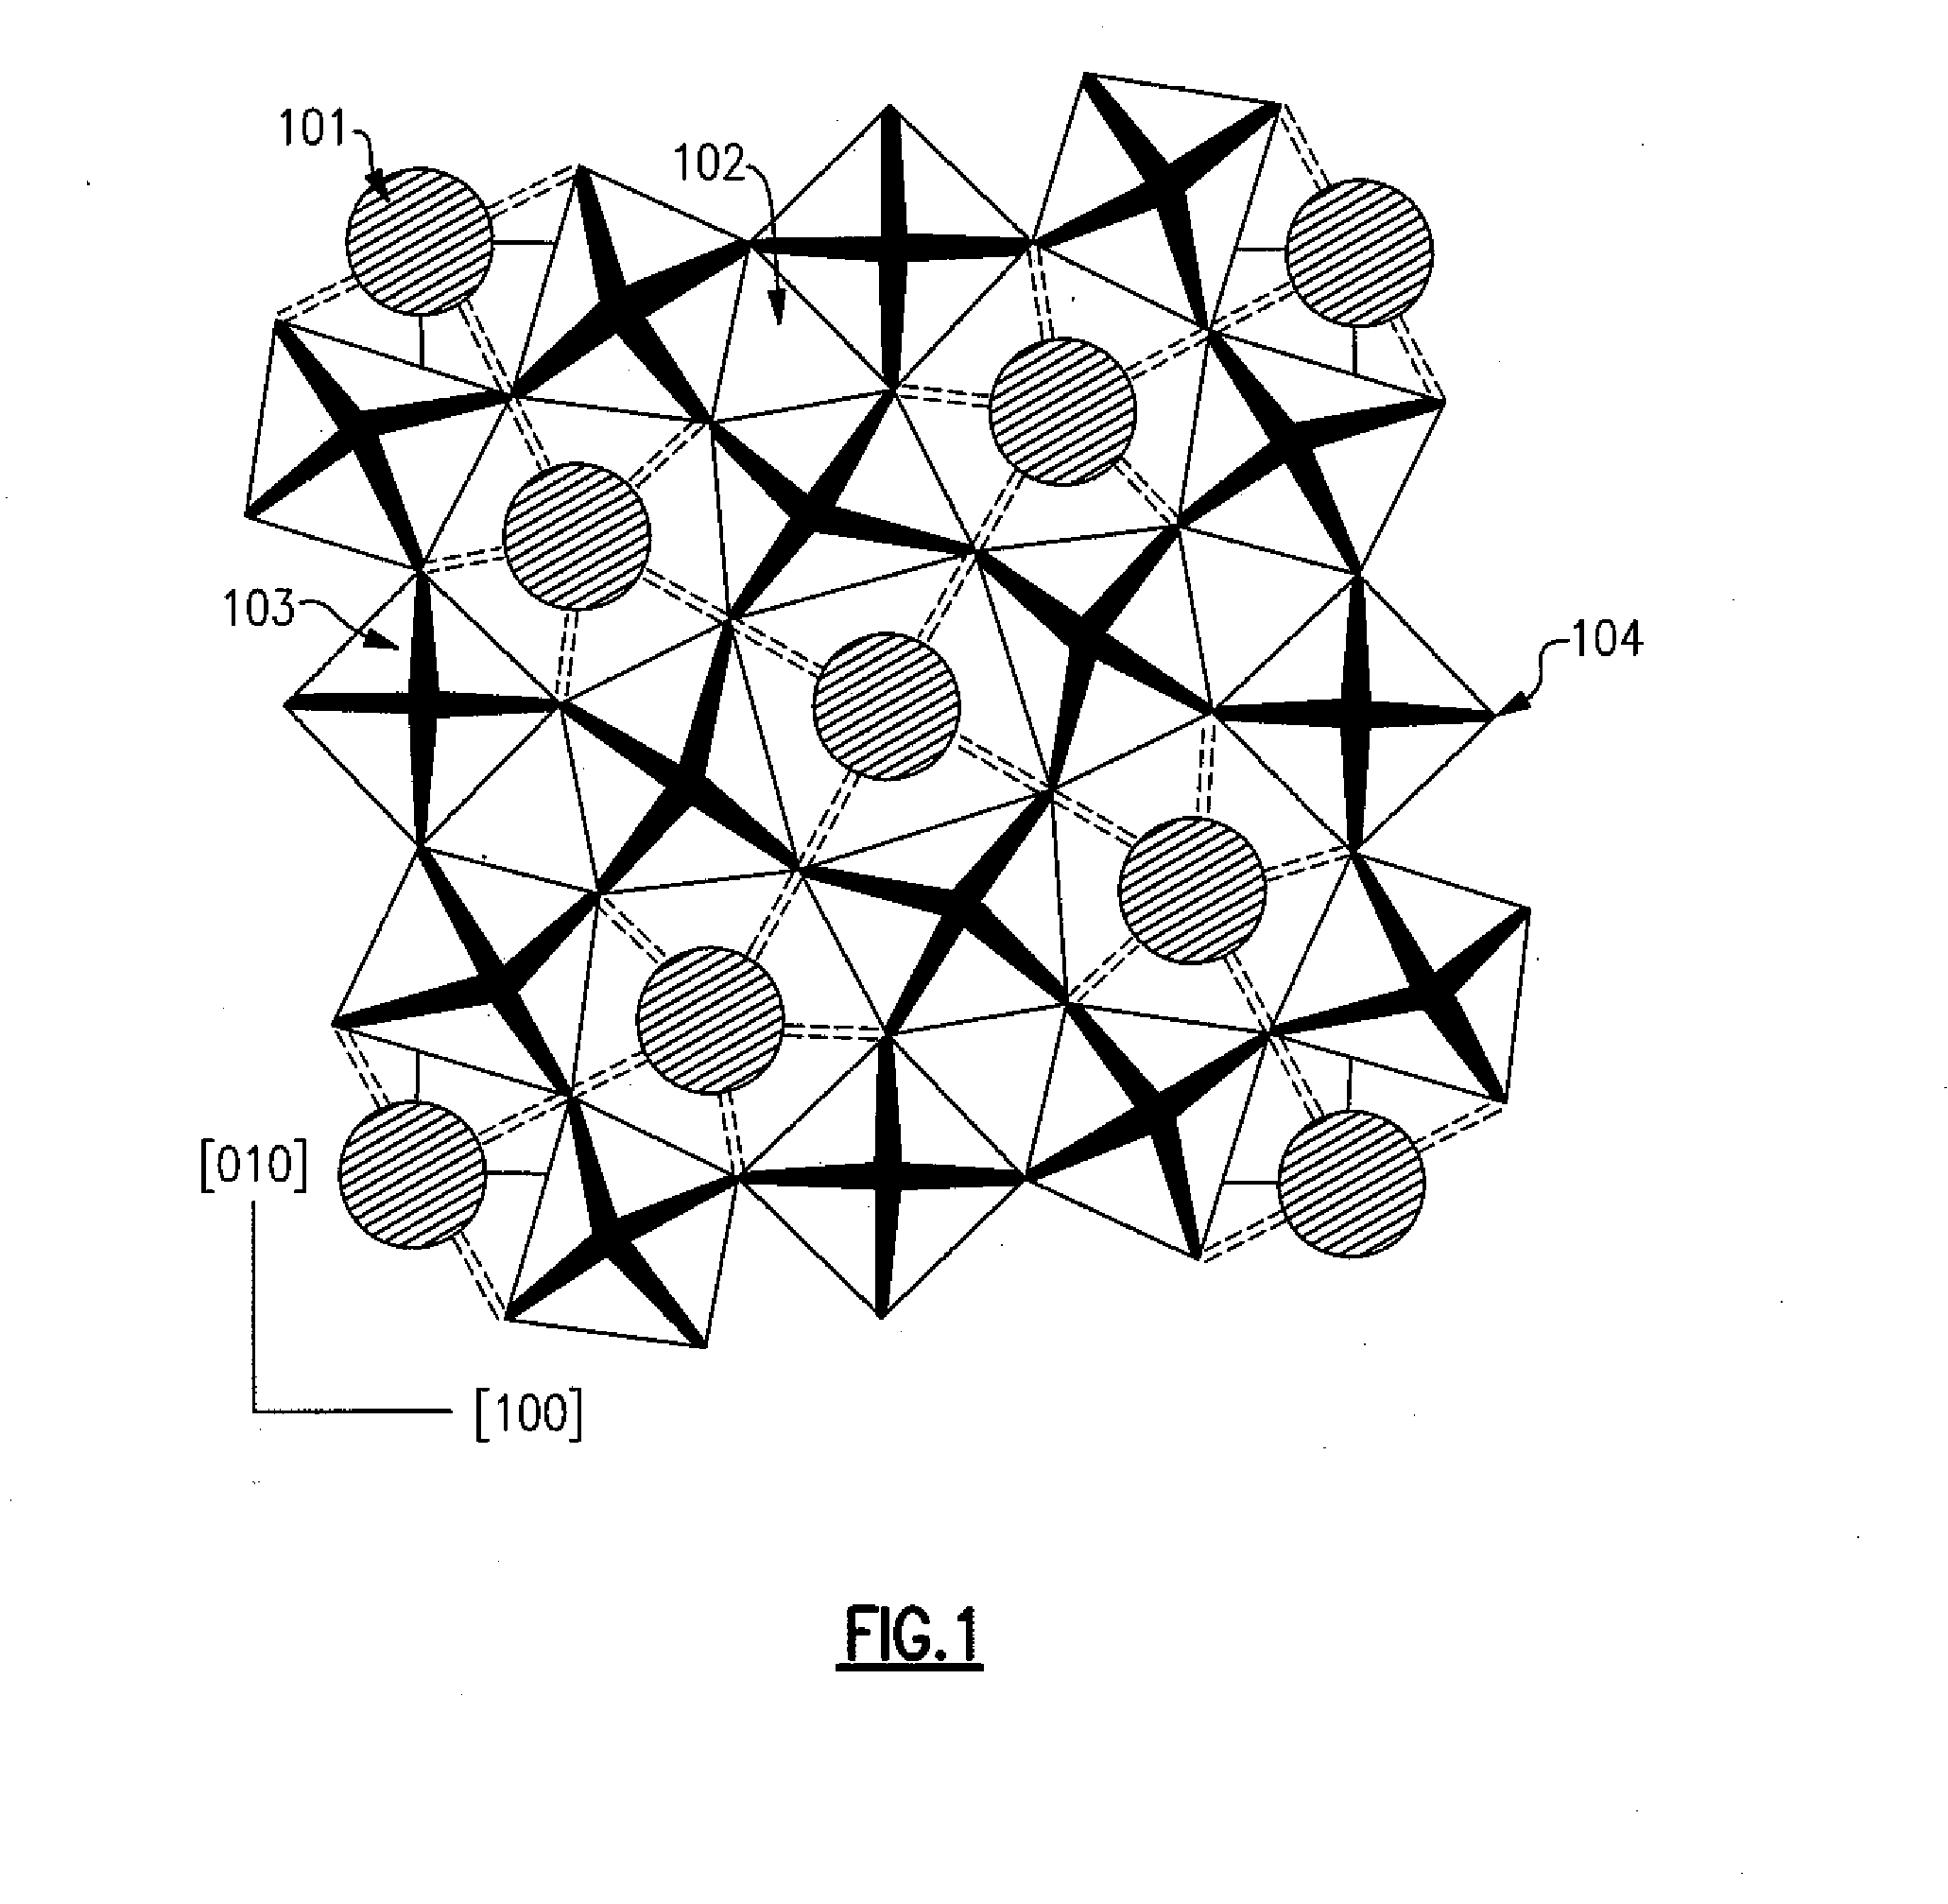 Novel enhanced high q material compositions and methods of preparing same